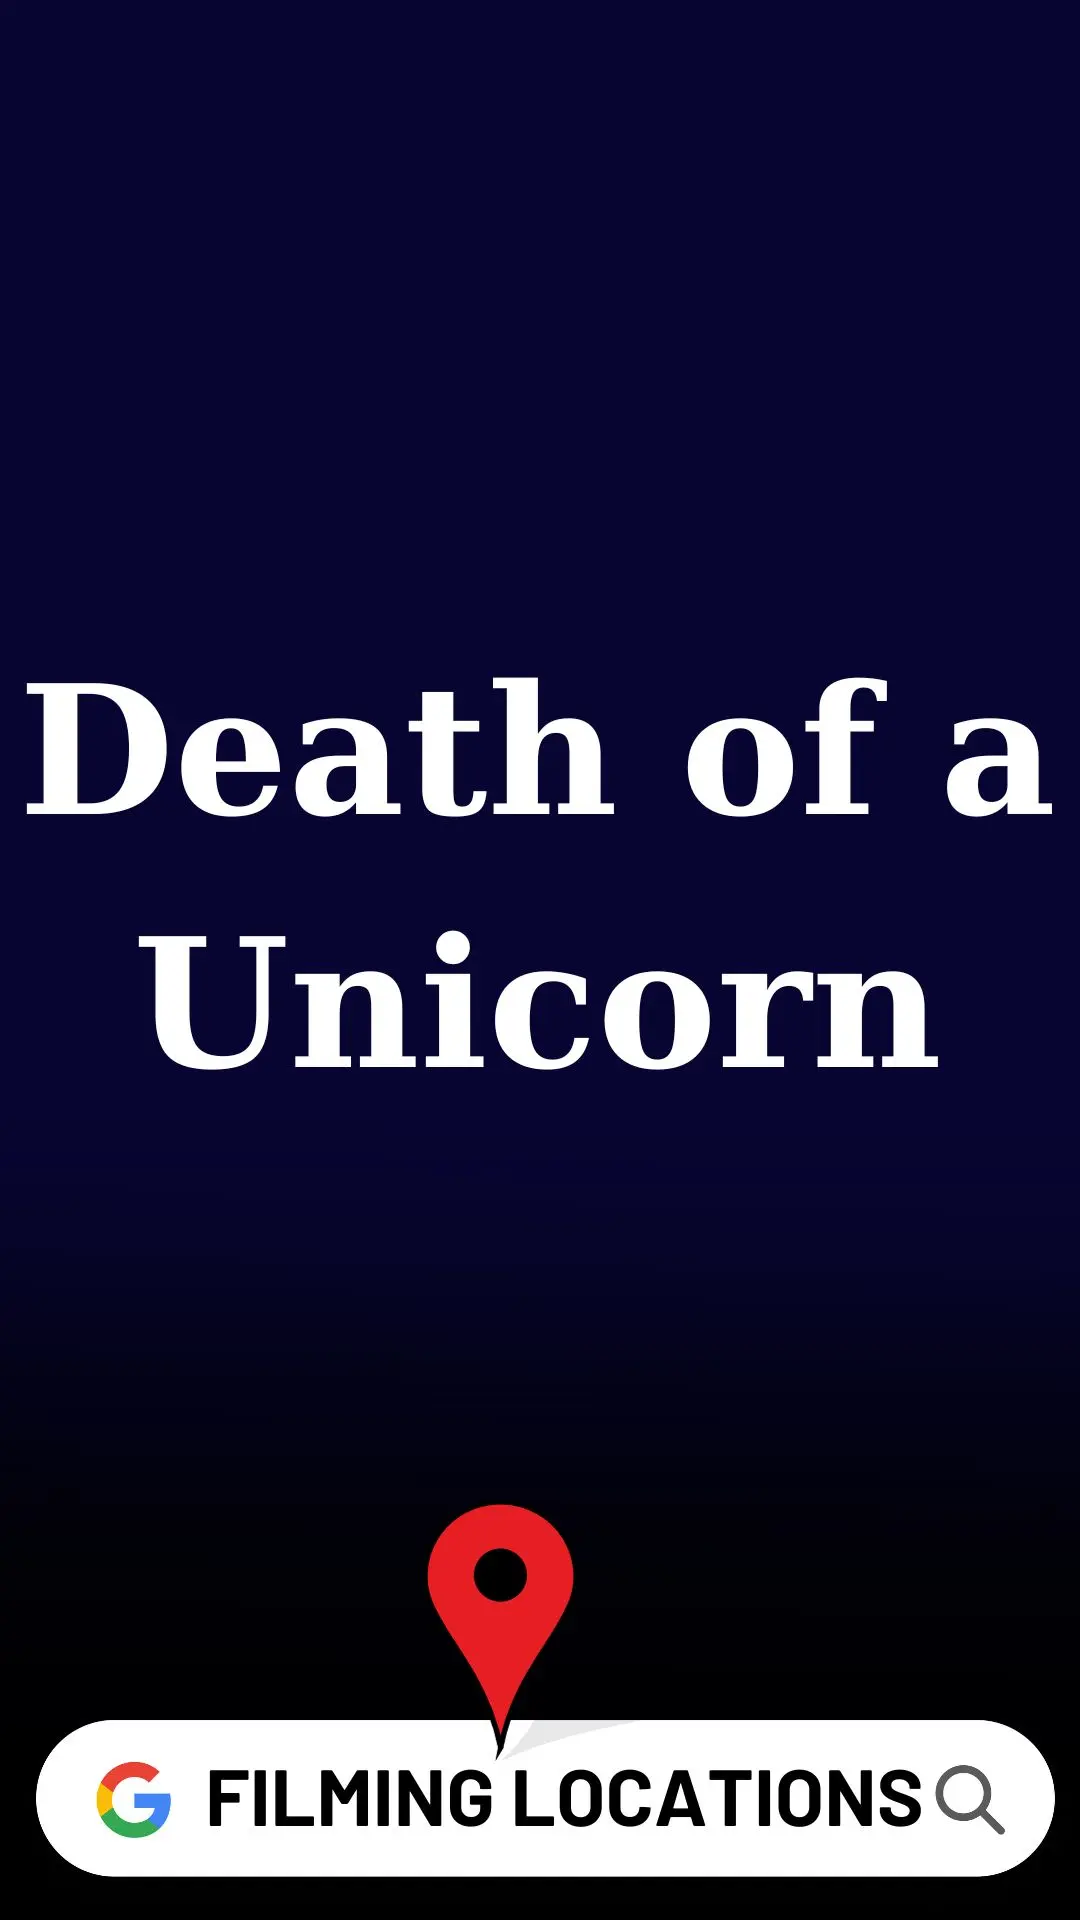 Death of a Unicorn Filming Locations